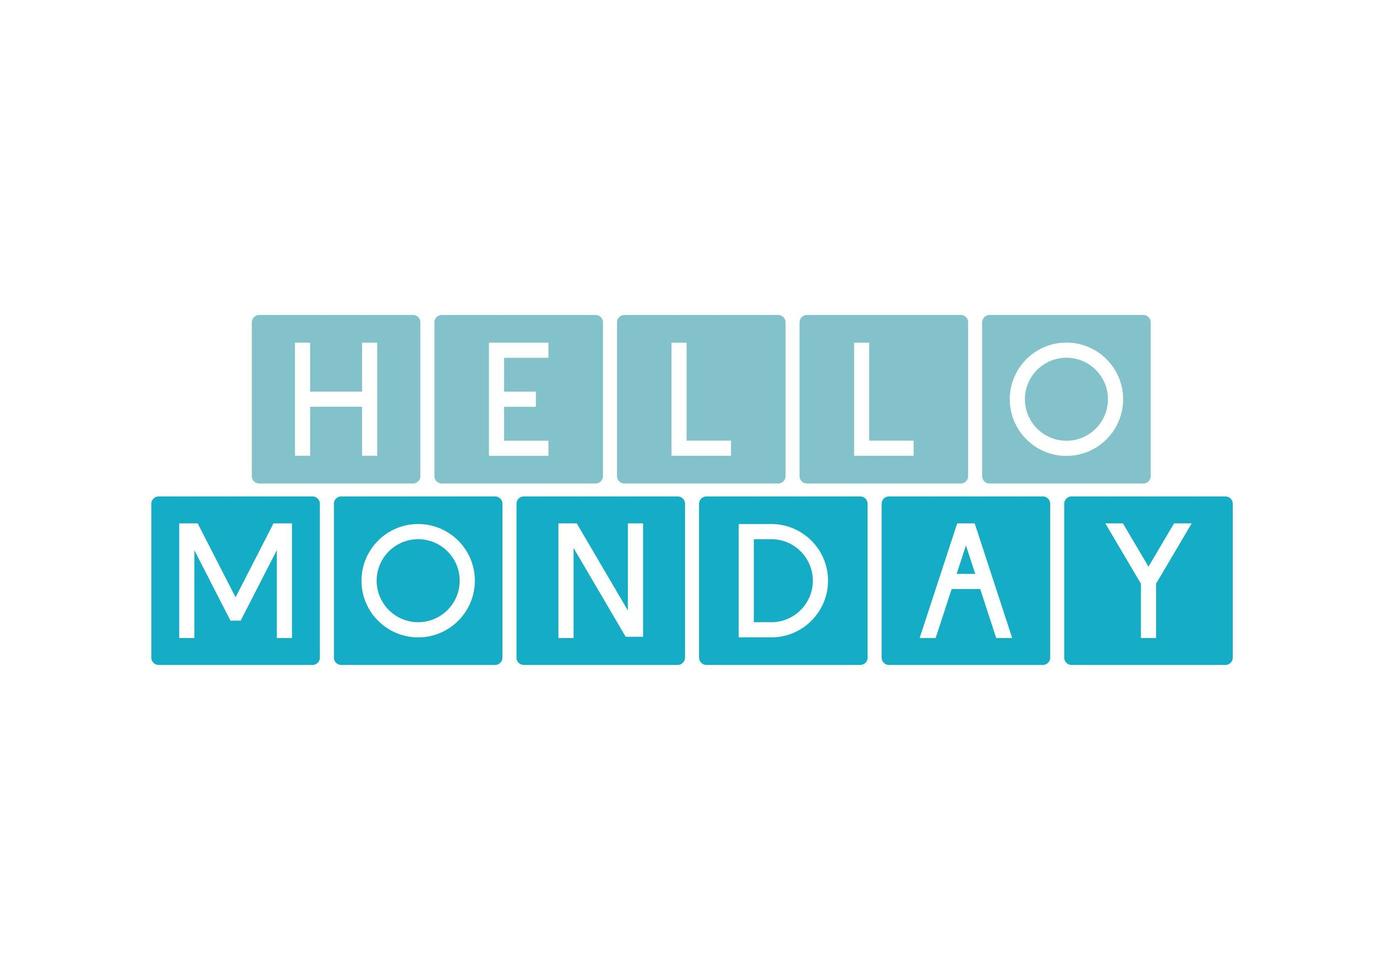 motivational quote of hello monday vector